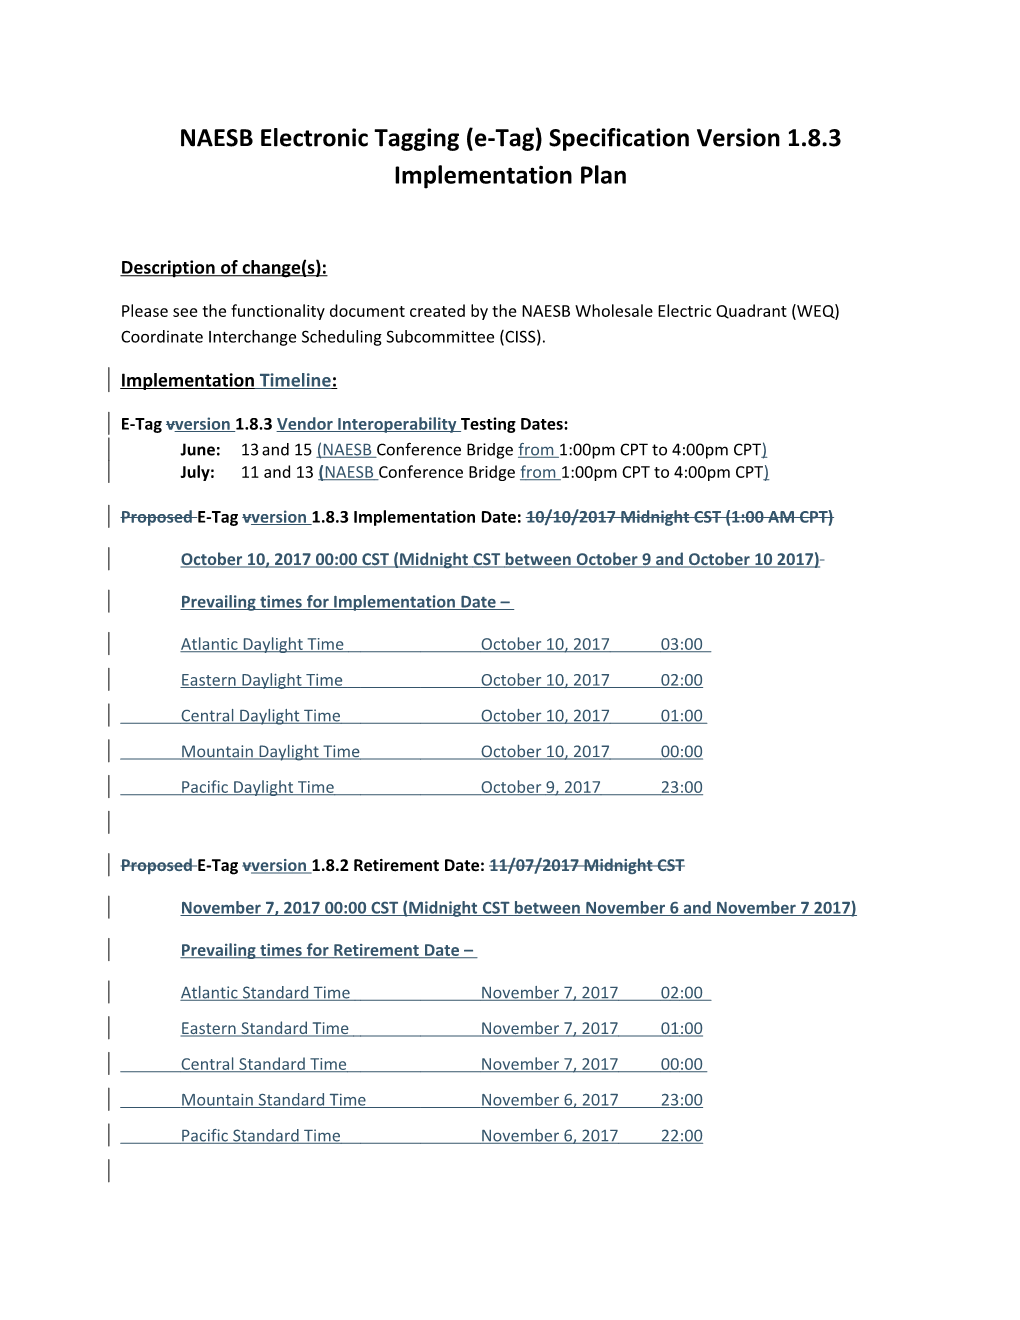 NAESB Electronic Tagging (E-Tag) Specification Version 1.8.3Implementation Plan